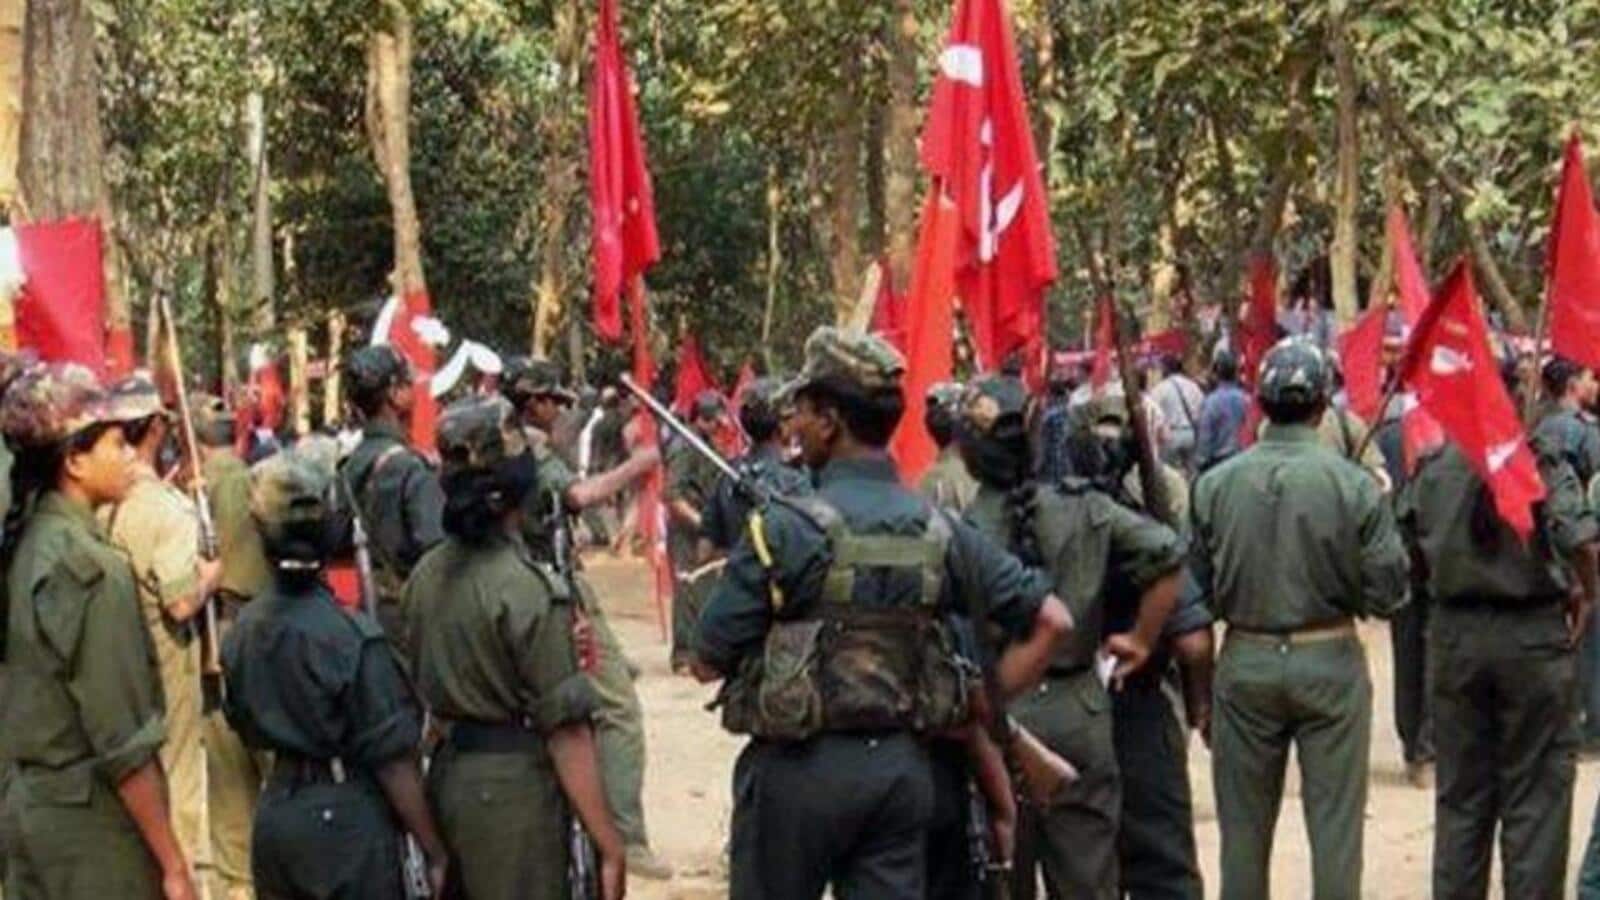 ‘Ready for talks’: Maoists respond to Baghel’s dialogue offer, then list conditions